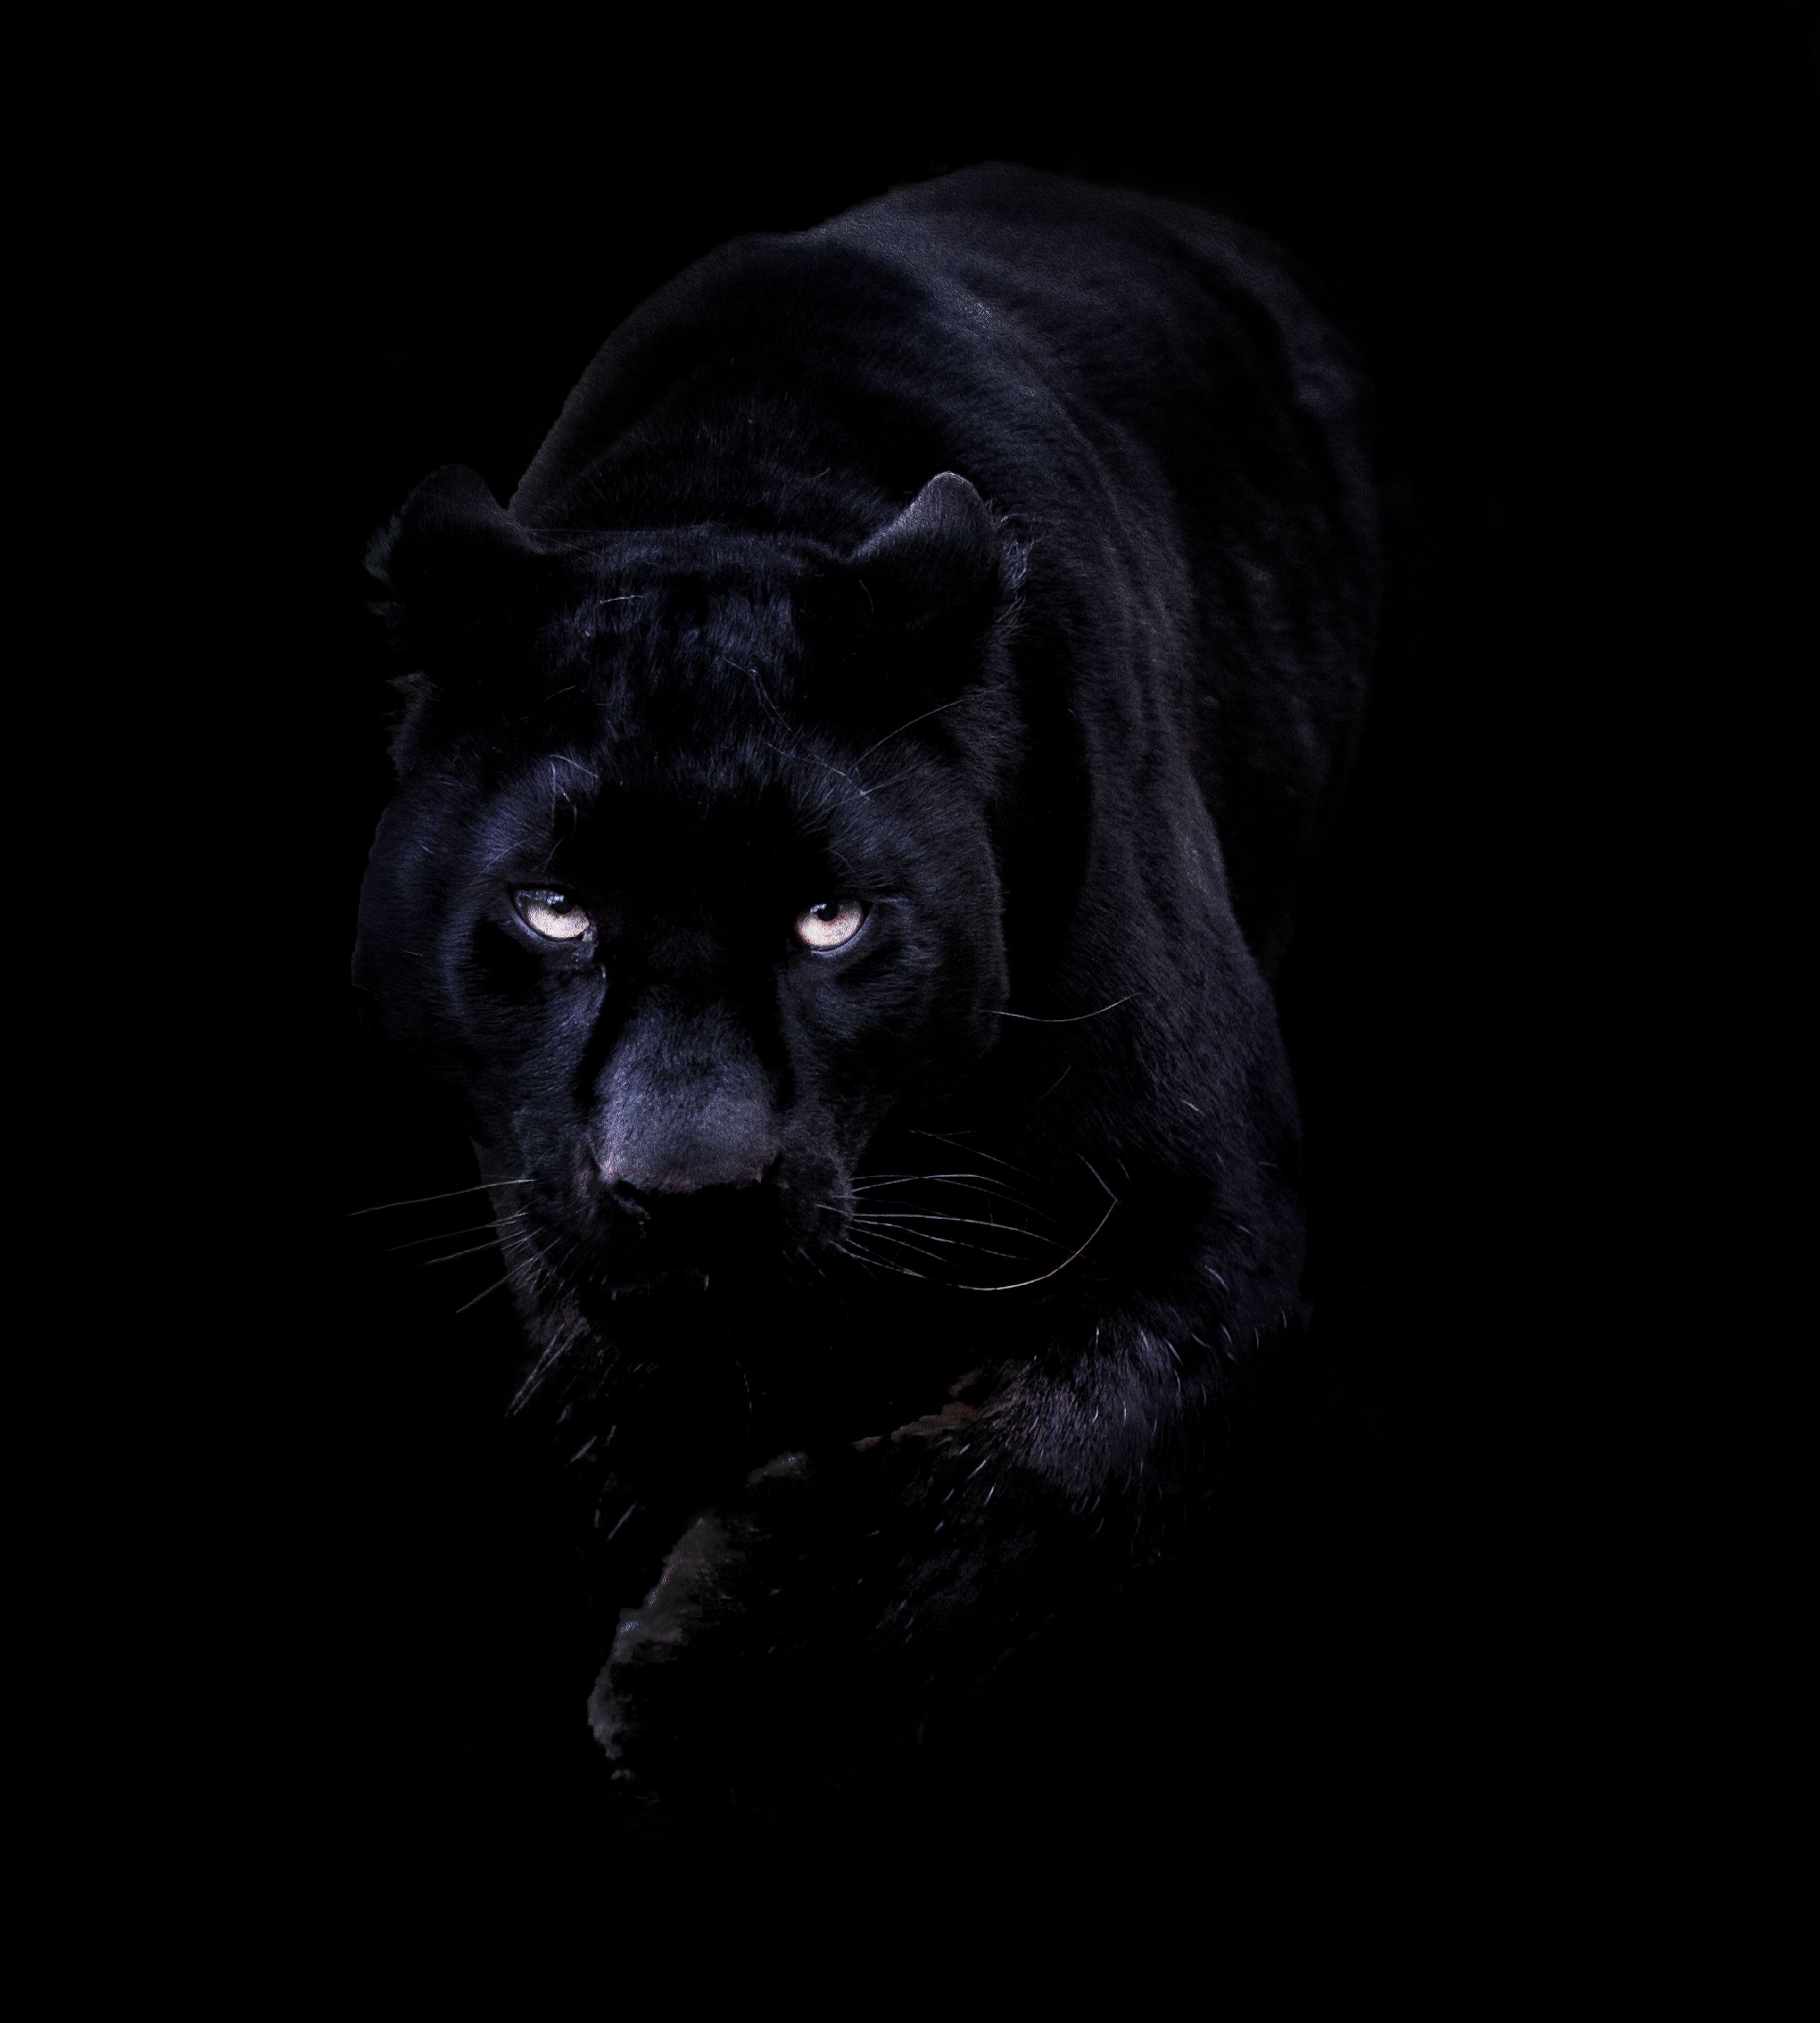 Black Panther Wallpapers High Quality | Download Free